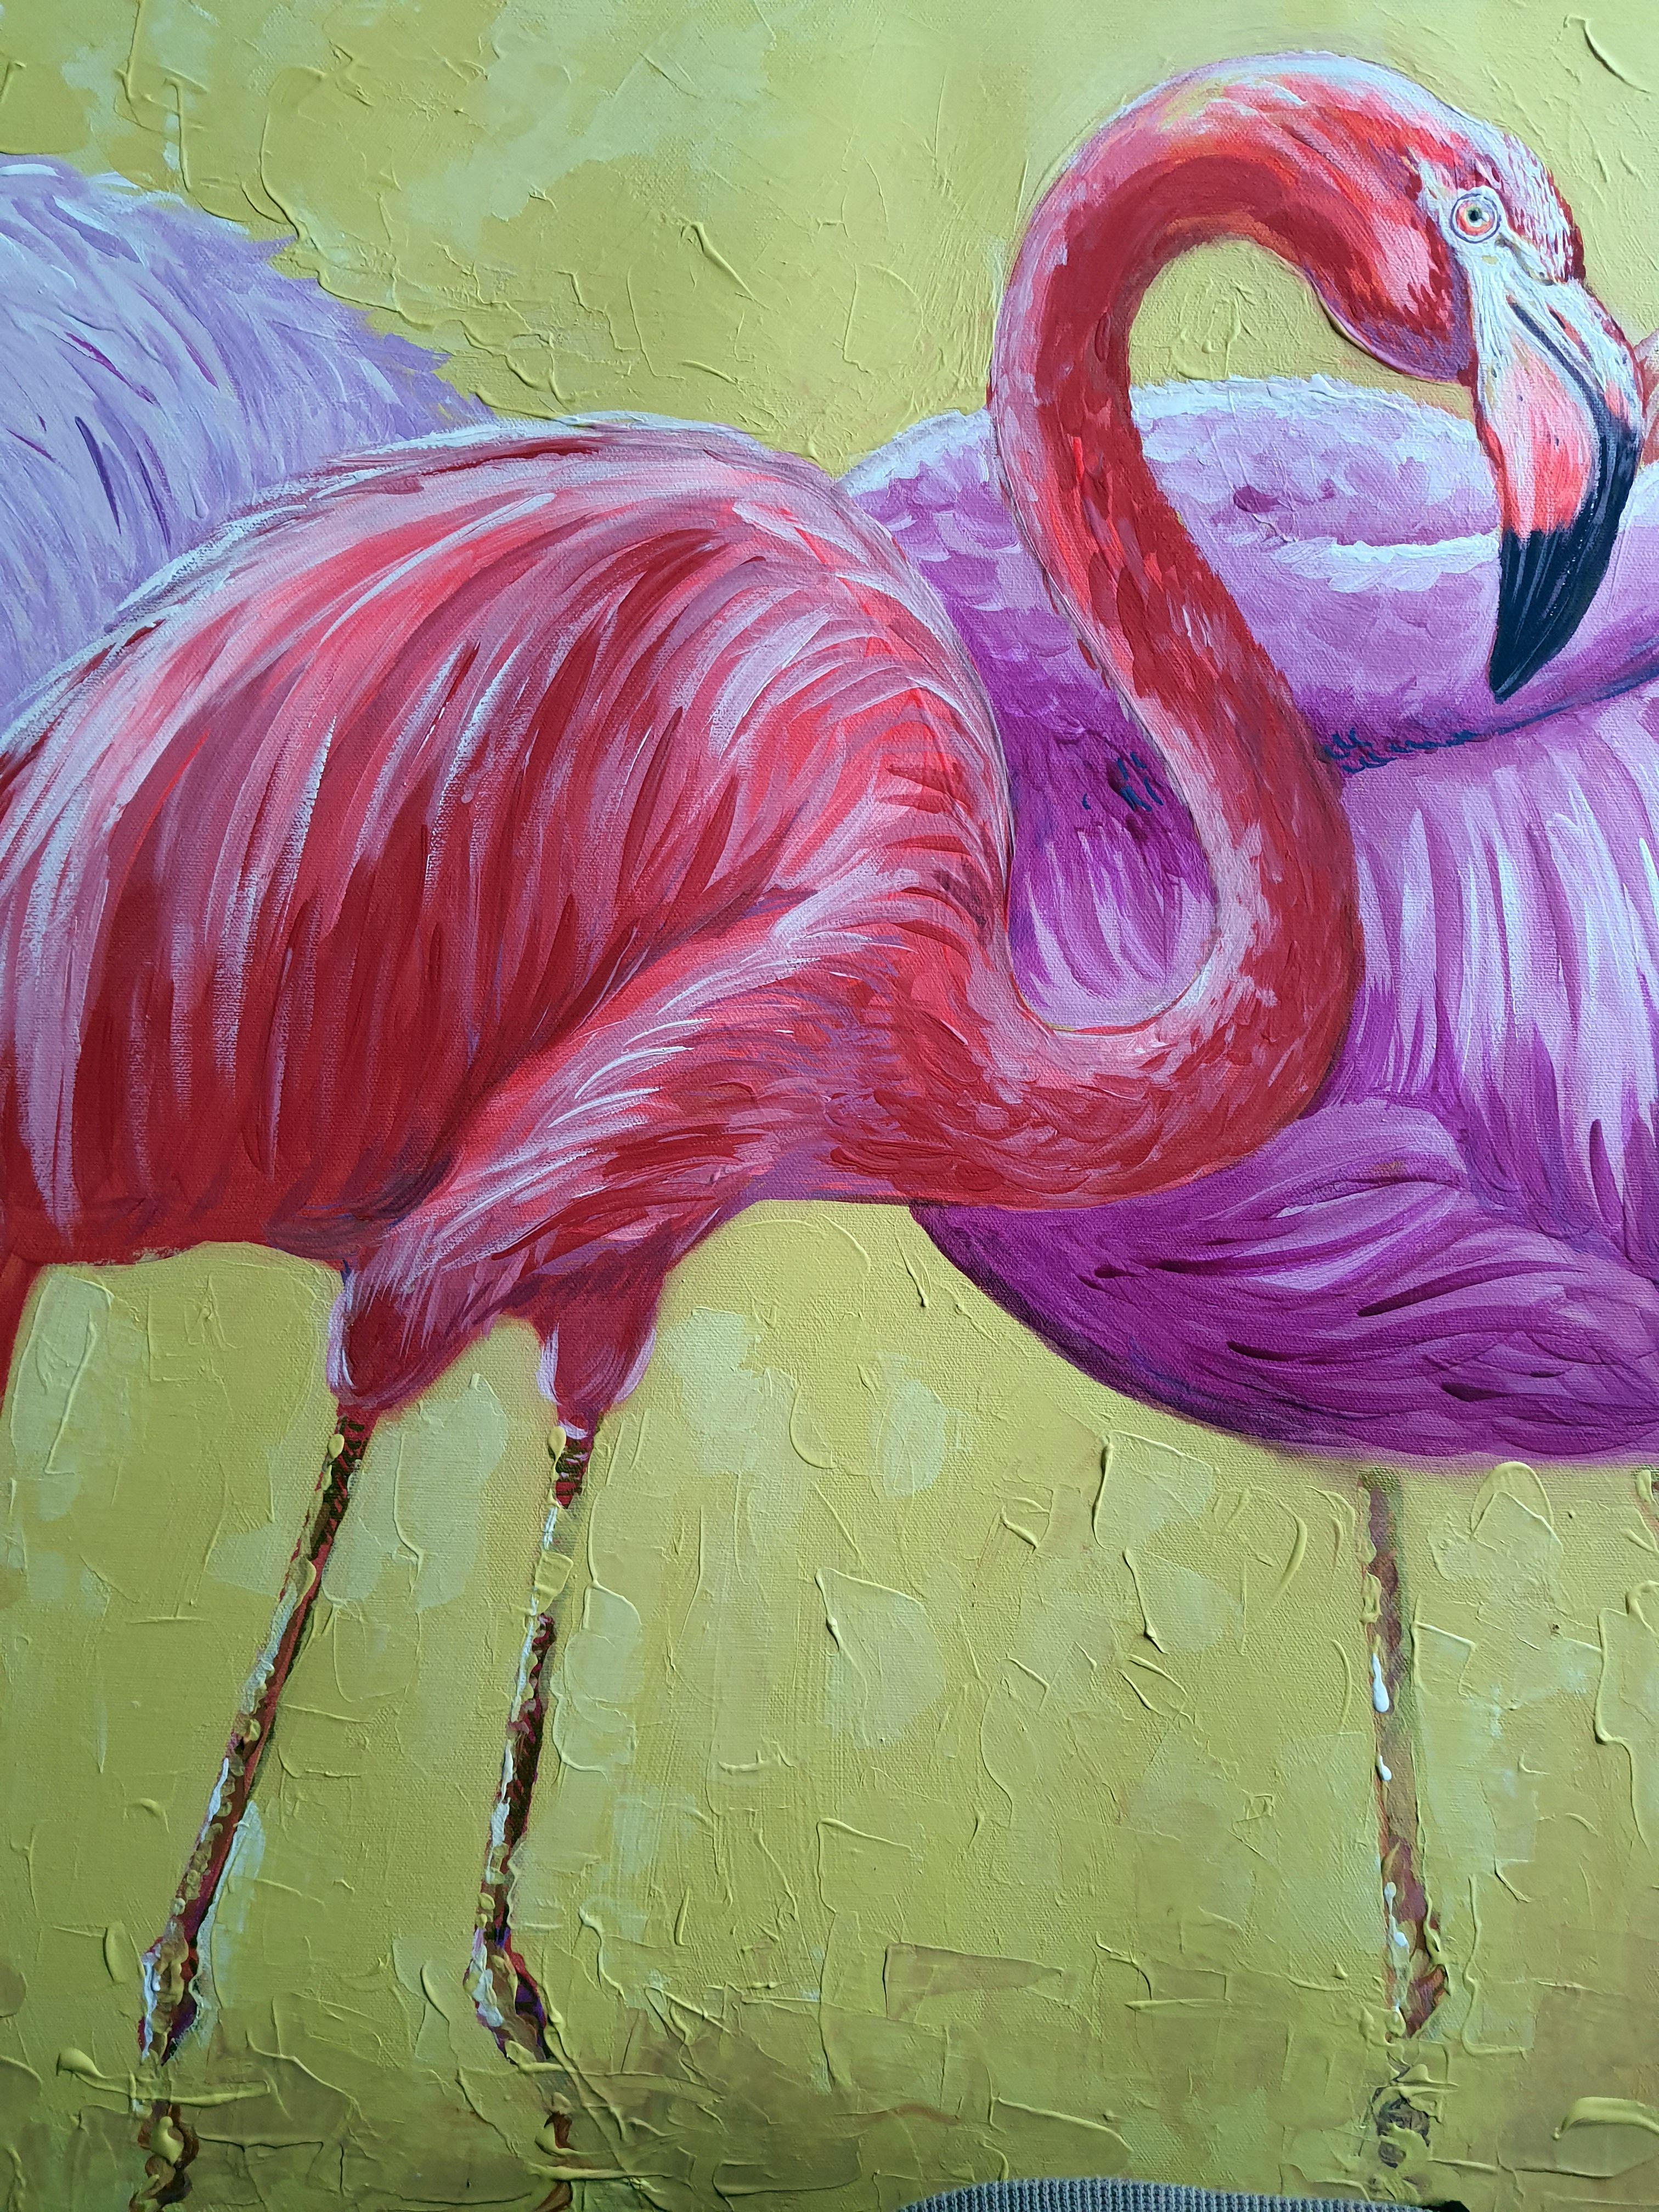 I poured my soul into the vibrant hues of this piece, where each brushstroke embodies the essence of life's fervor. The flamingos, resplendent in acrylic and oil, are a dance of color against a golden canvas—a symphony of expressionism and